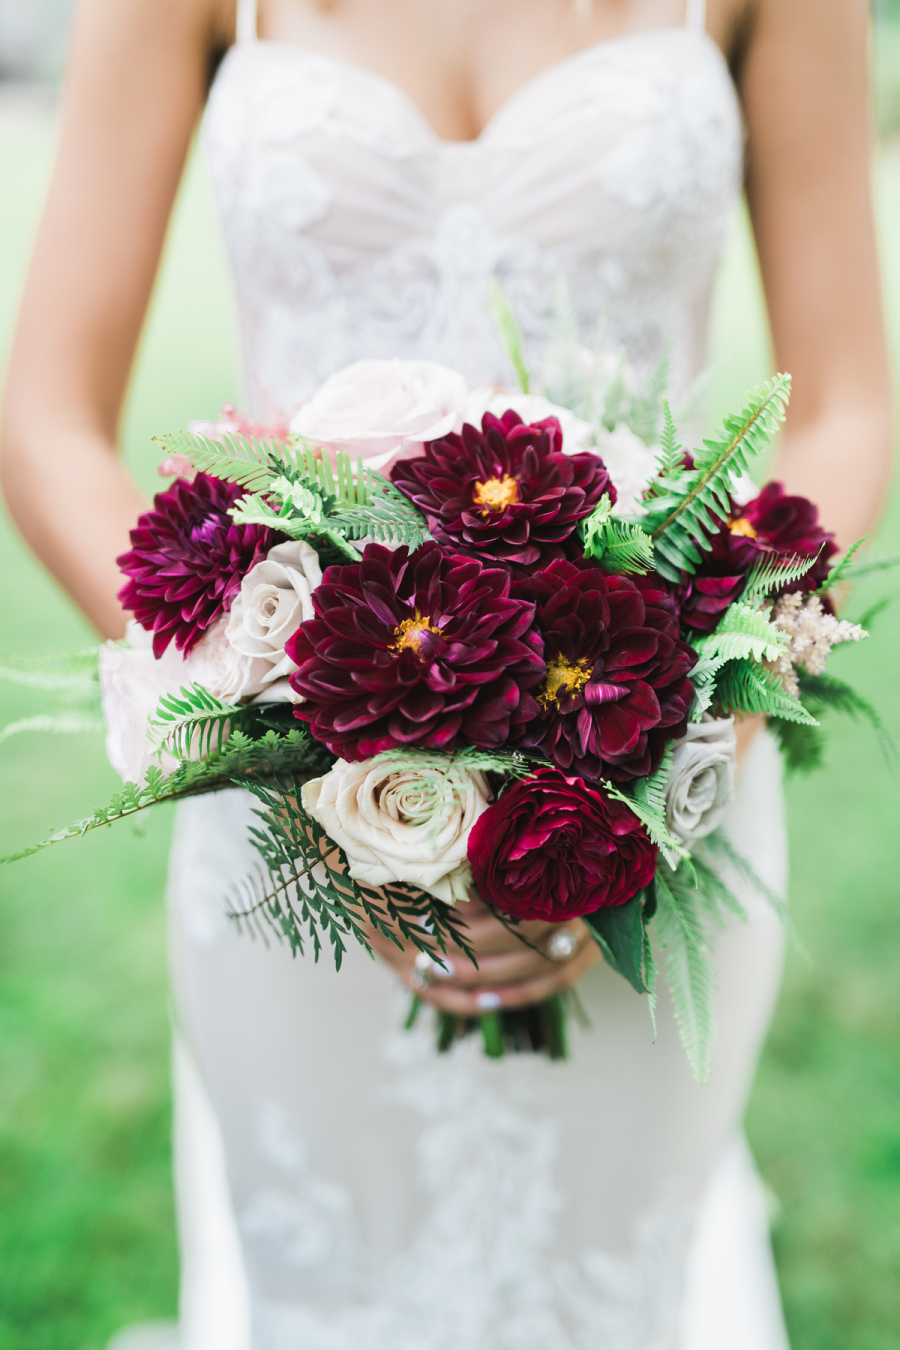 Her bouquet was done with creamy and deep burgundy blooms to highlight the jewel color scheme